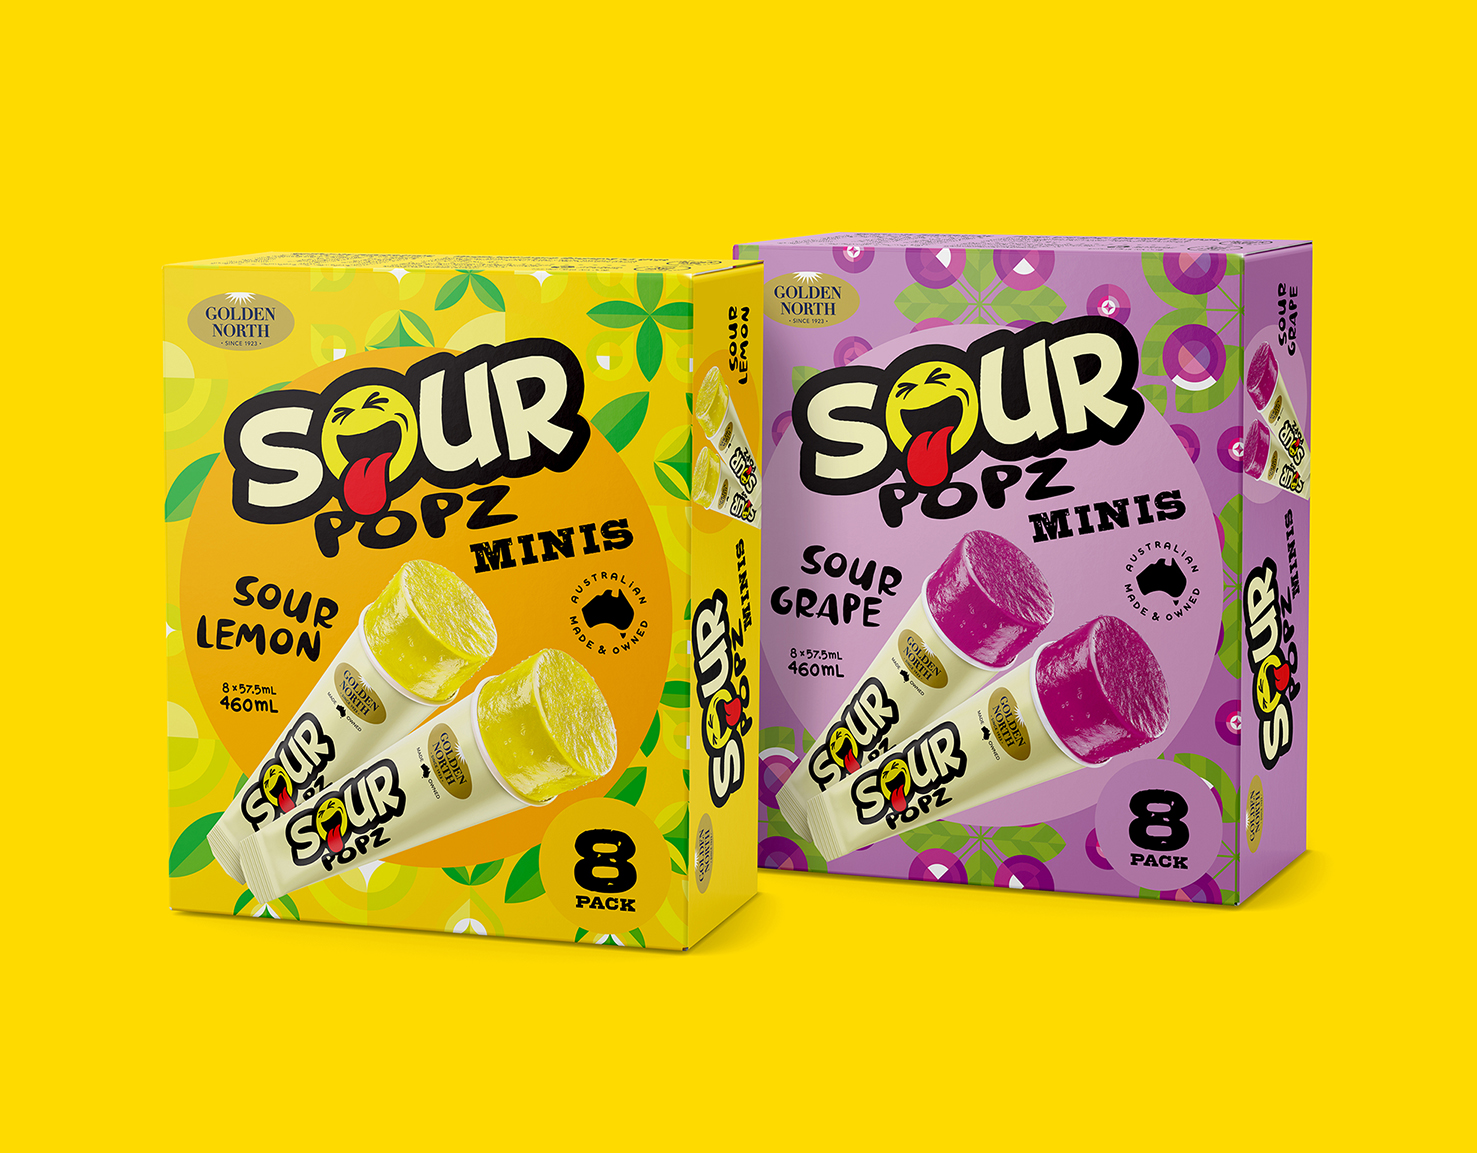 Asprey Creative’s Approach to Sour Popz Branding: Balancing Youth Appeal and Mainstream Reach